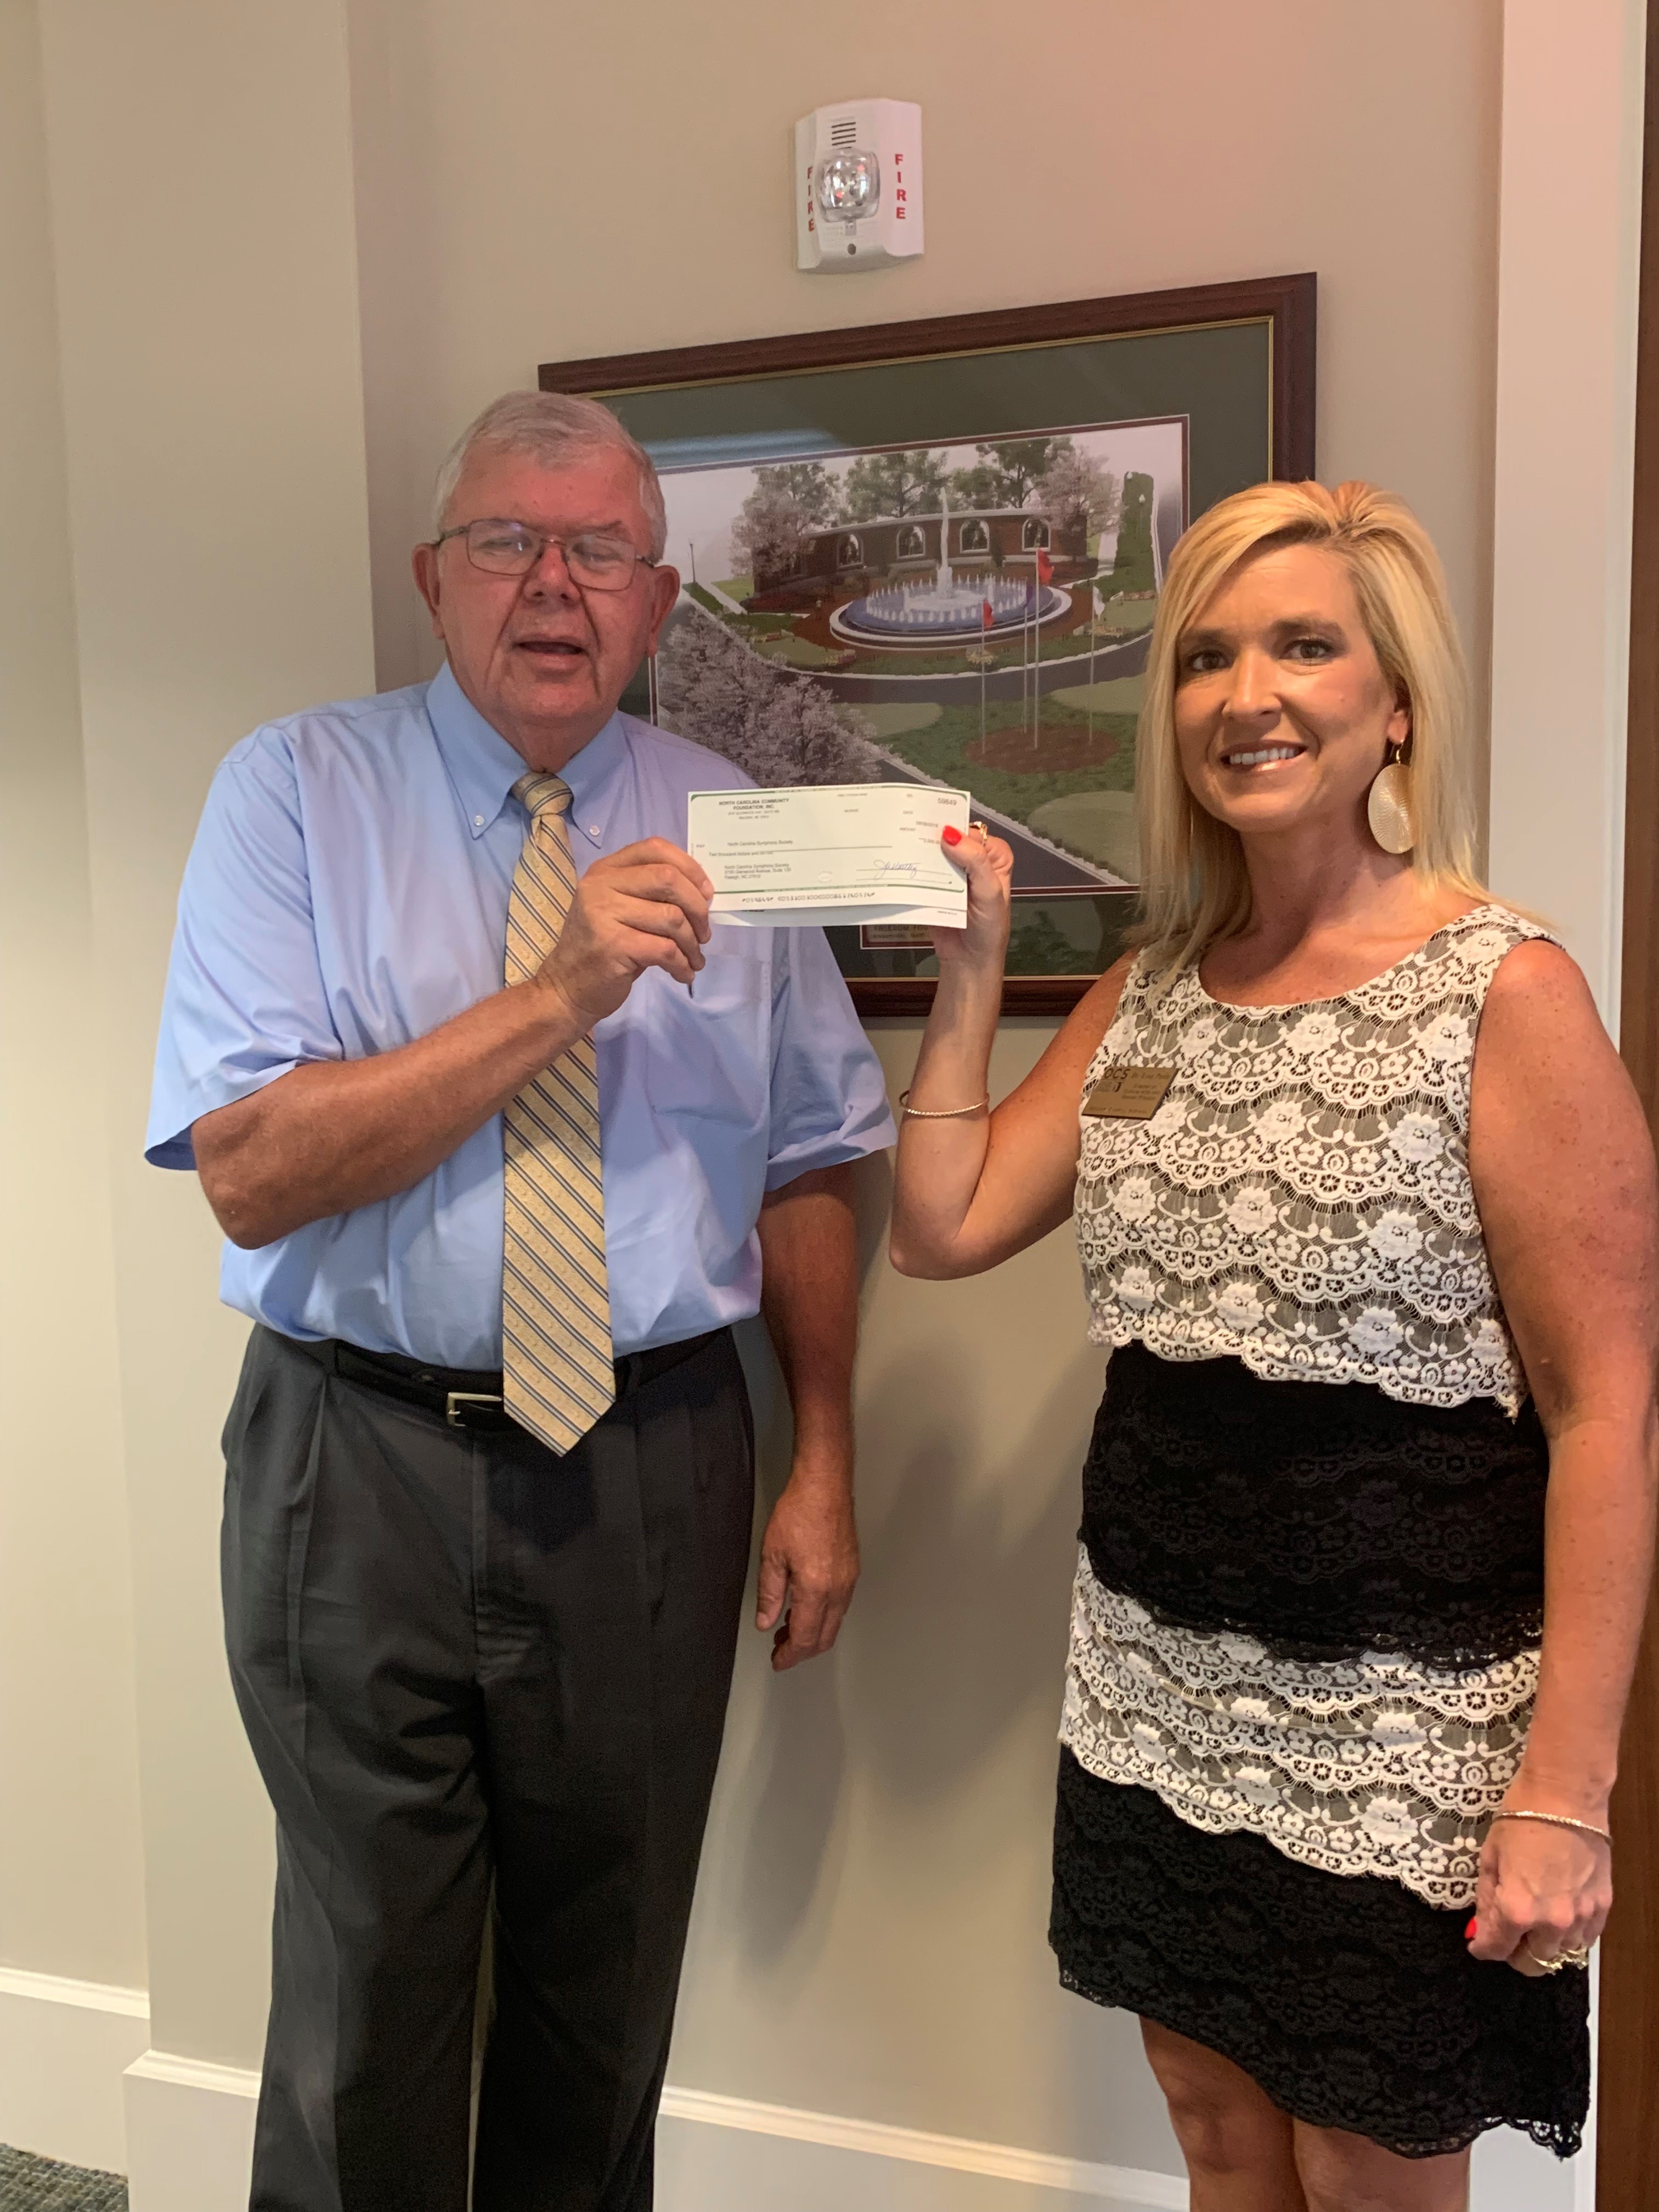 Earl Taylor, president of the Onslow County Board for the NC Symphony, with Dr. Lisa Peele, arts director and education concert coordinator of Onslow County Schools, are excited to receive grant funding from OCCF for the annual NC Symphony Education Concert.